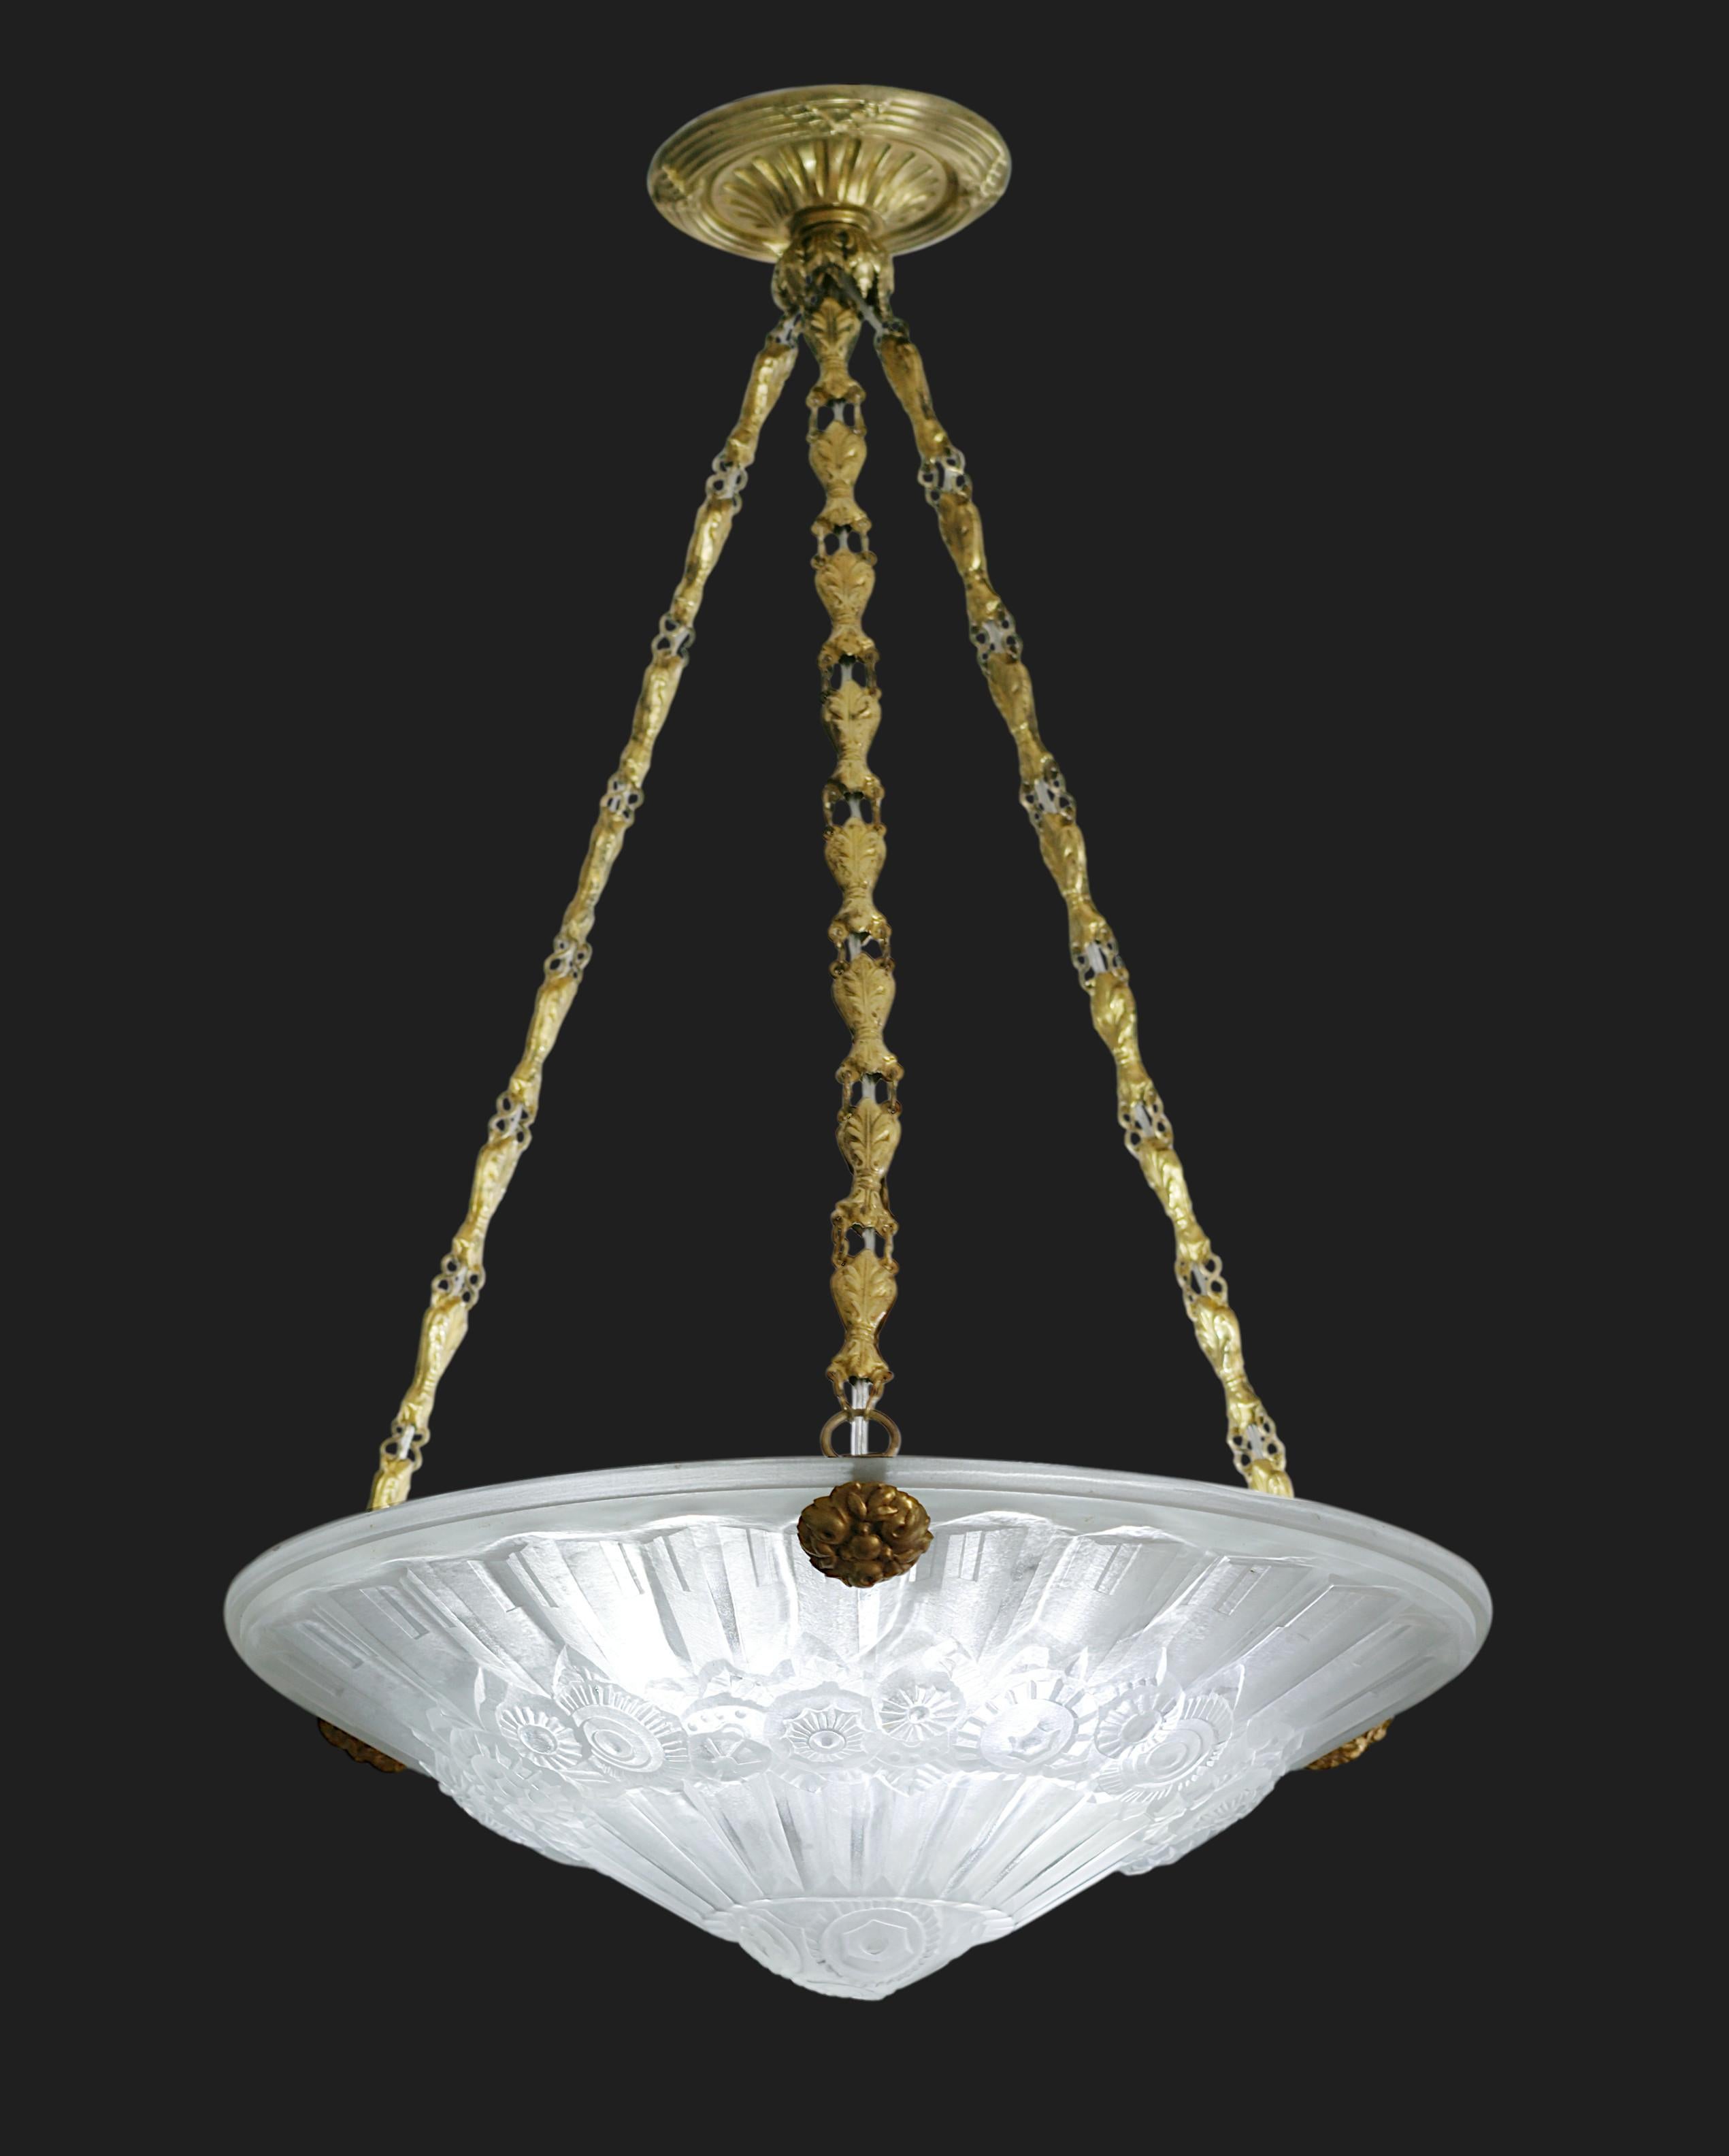 French Art Deco pendant chandelier by Jean Gauthier (Paris), France, late 1920s. Floral decor. Frosted molded glass shade hung at its stamped brass frame. Same period as Lalique, Sabino, Etling. Measures: height: 21.7